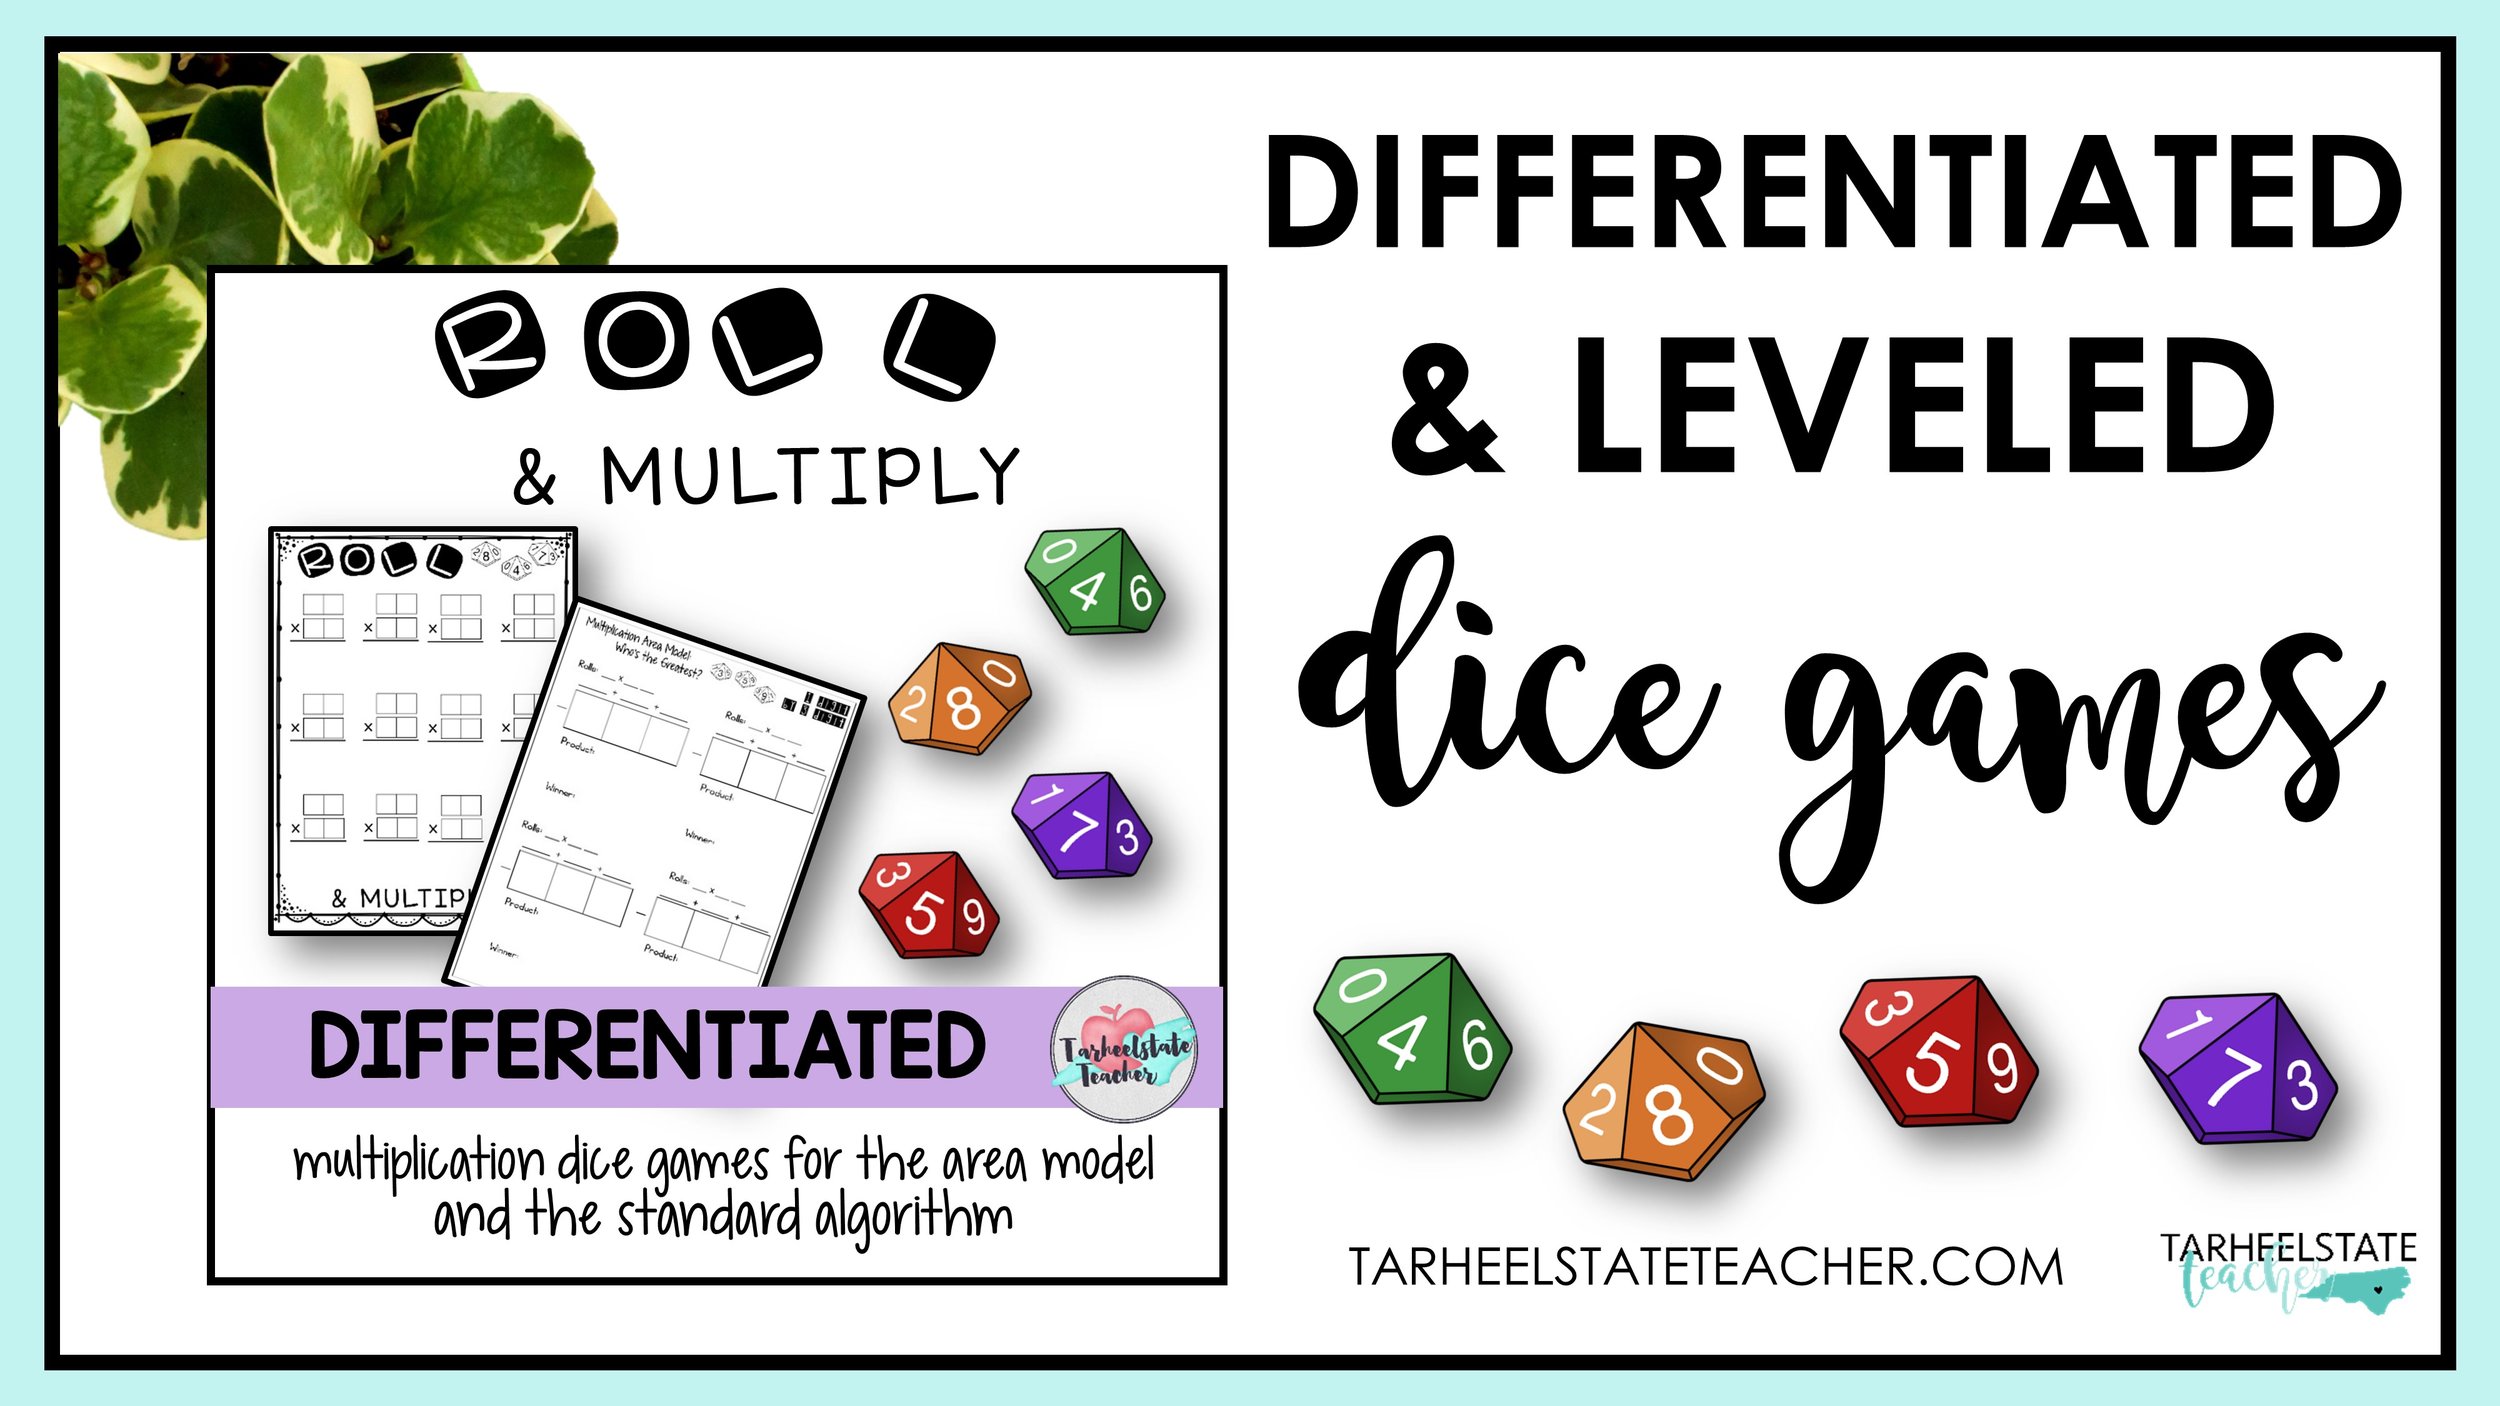 The multiplication game for mathematics understanding